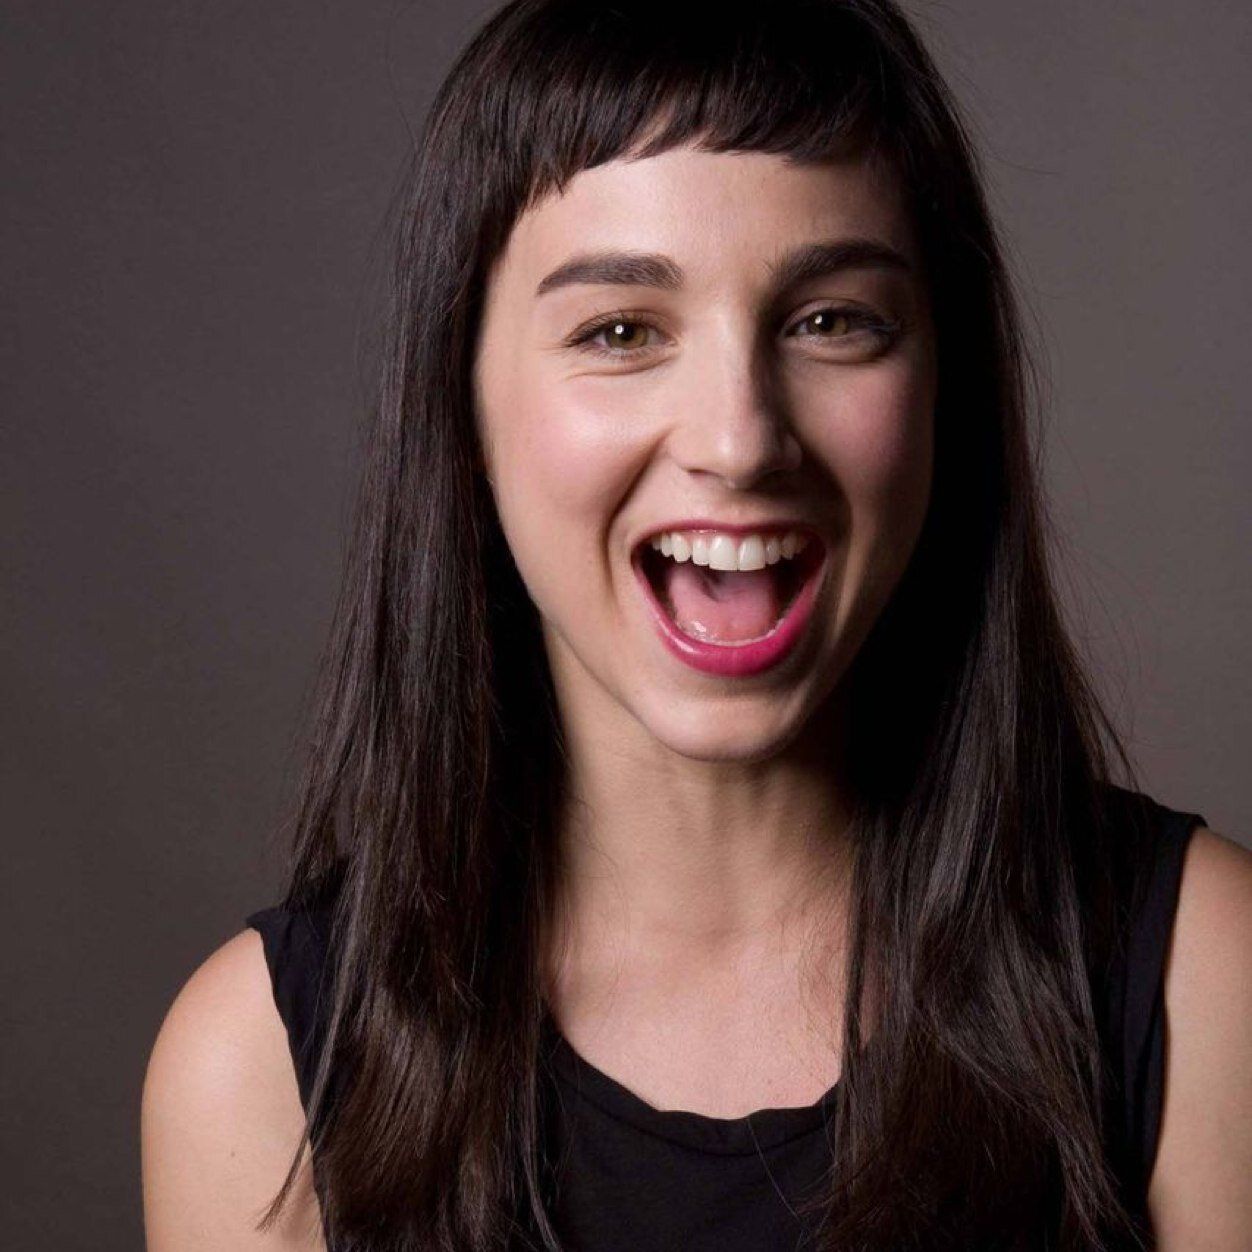 Pictures of Molly Ephraim